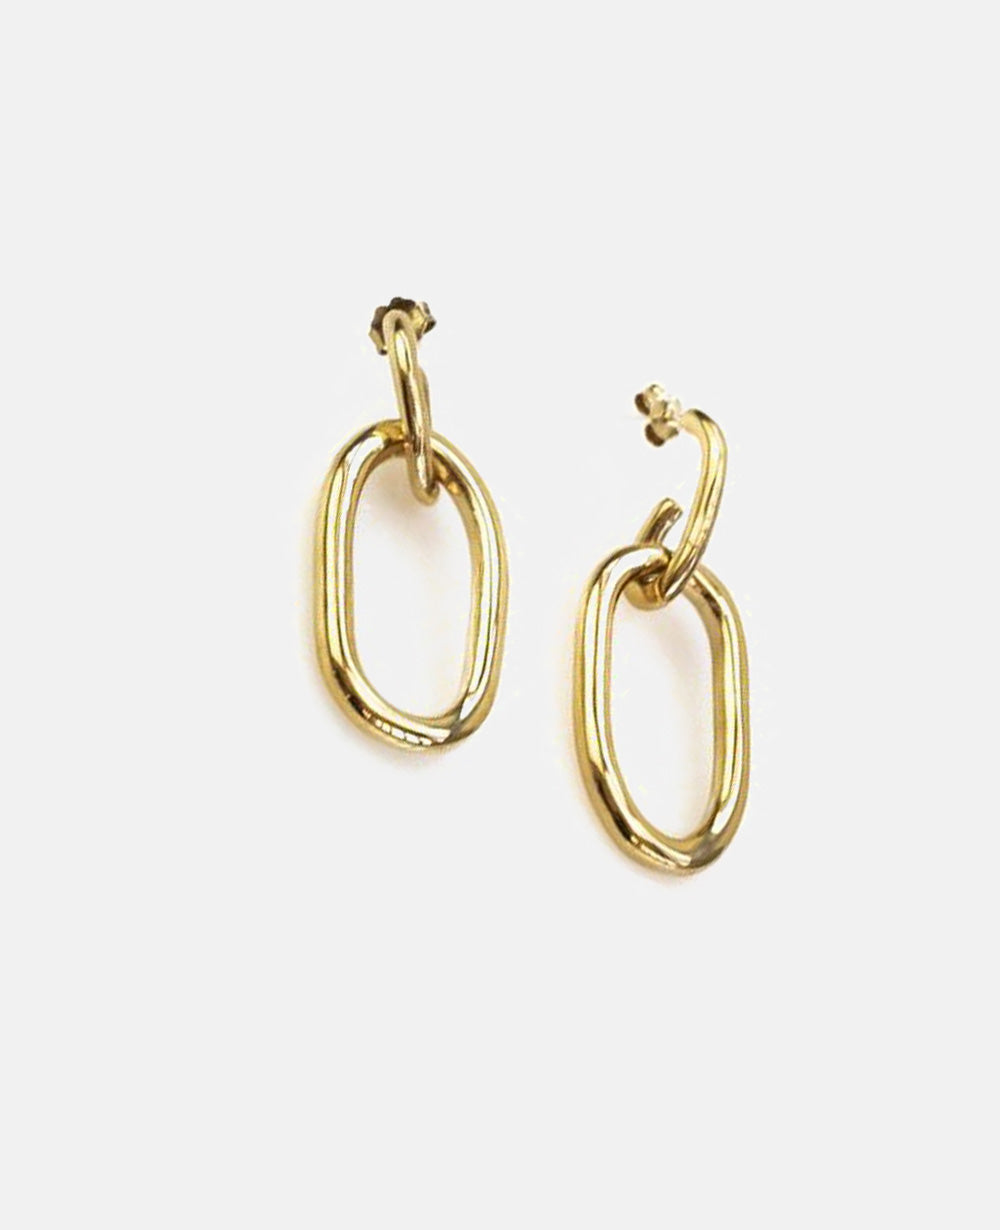 HOOPS "INTERTWINE" GOLD